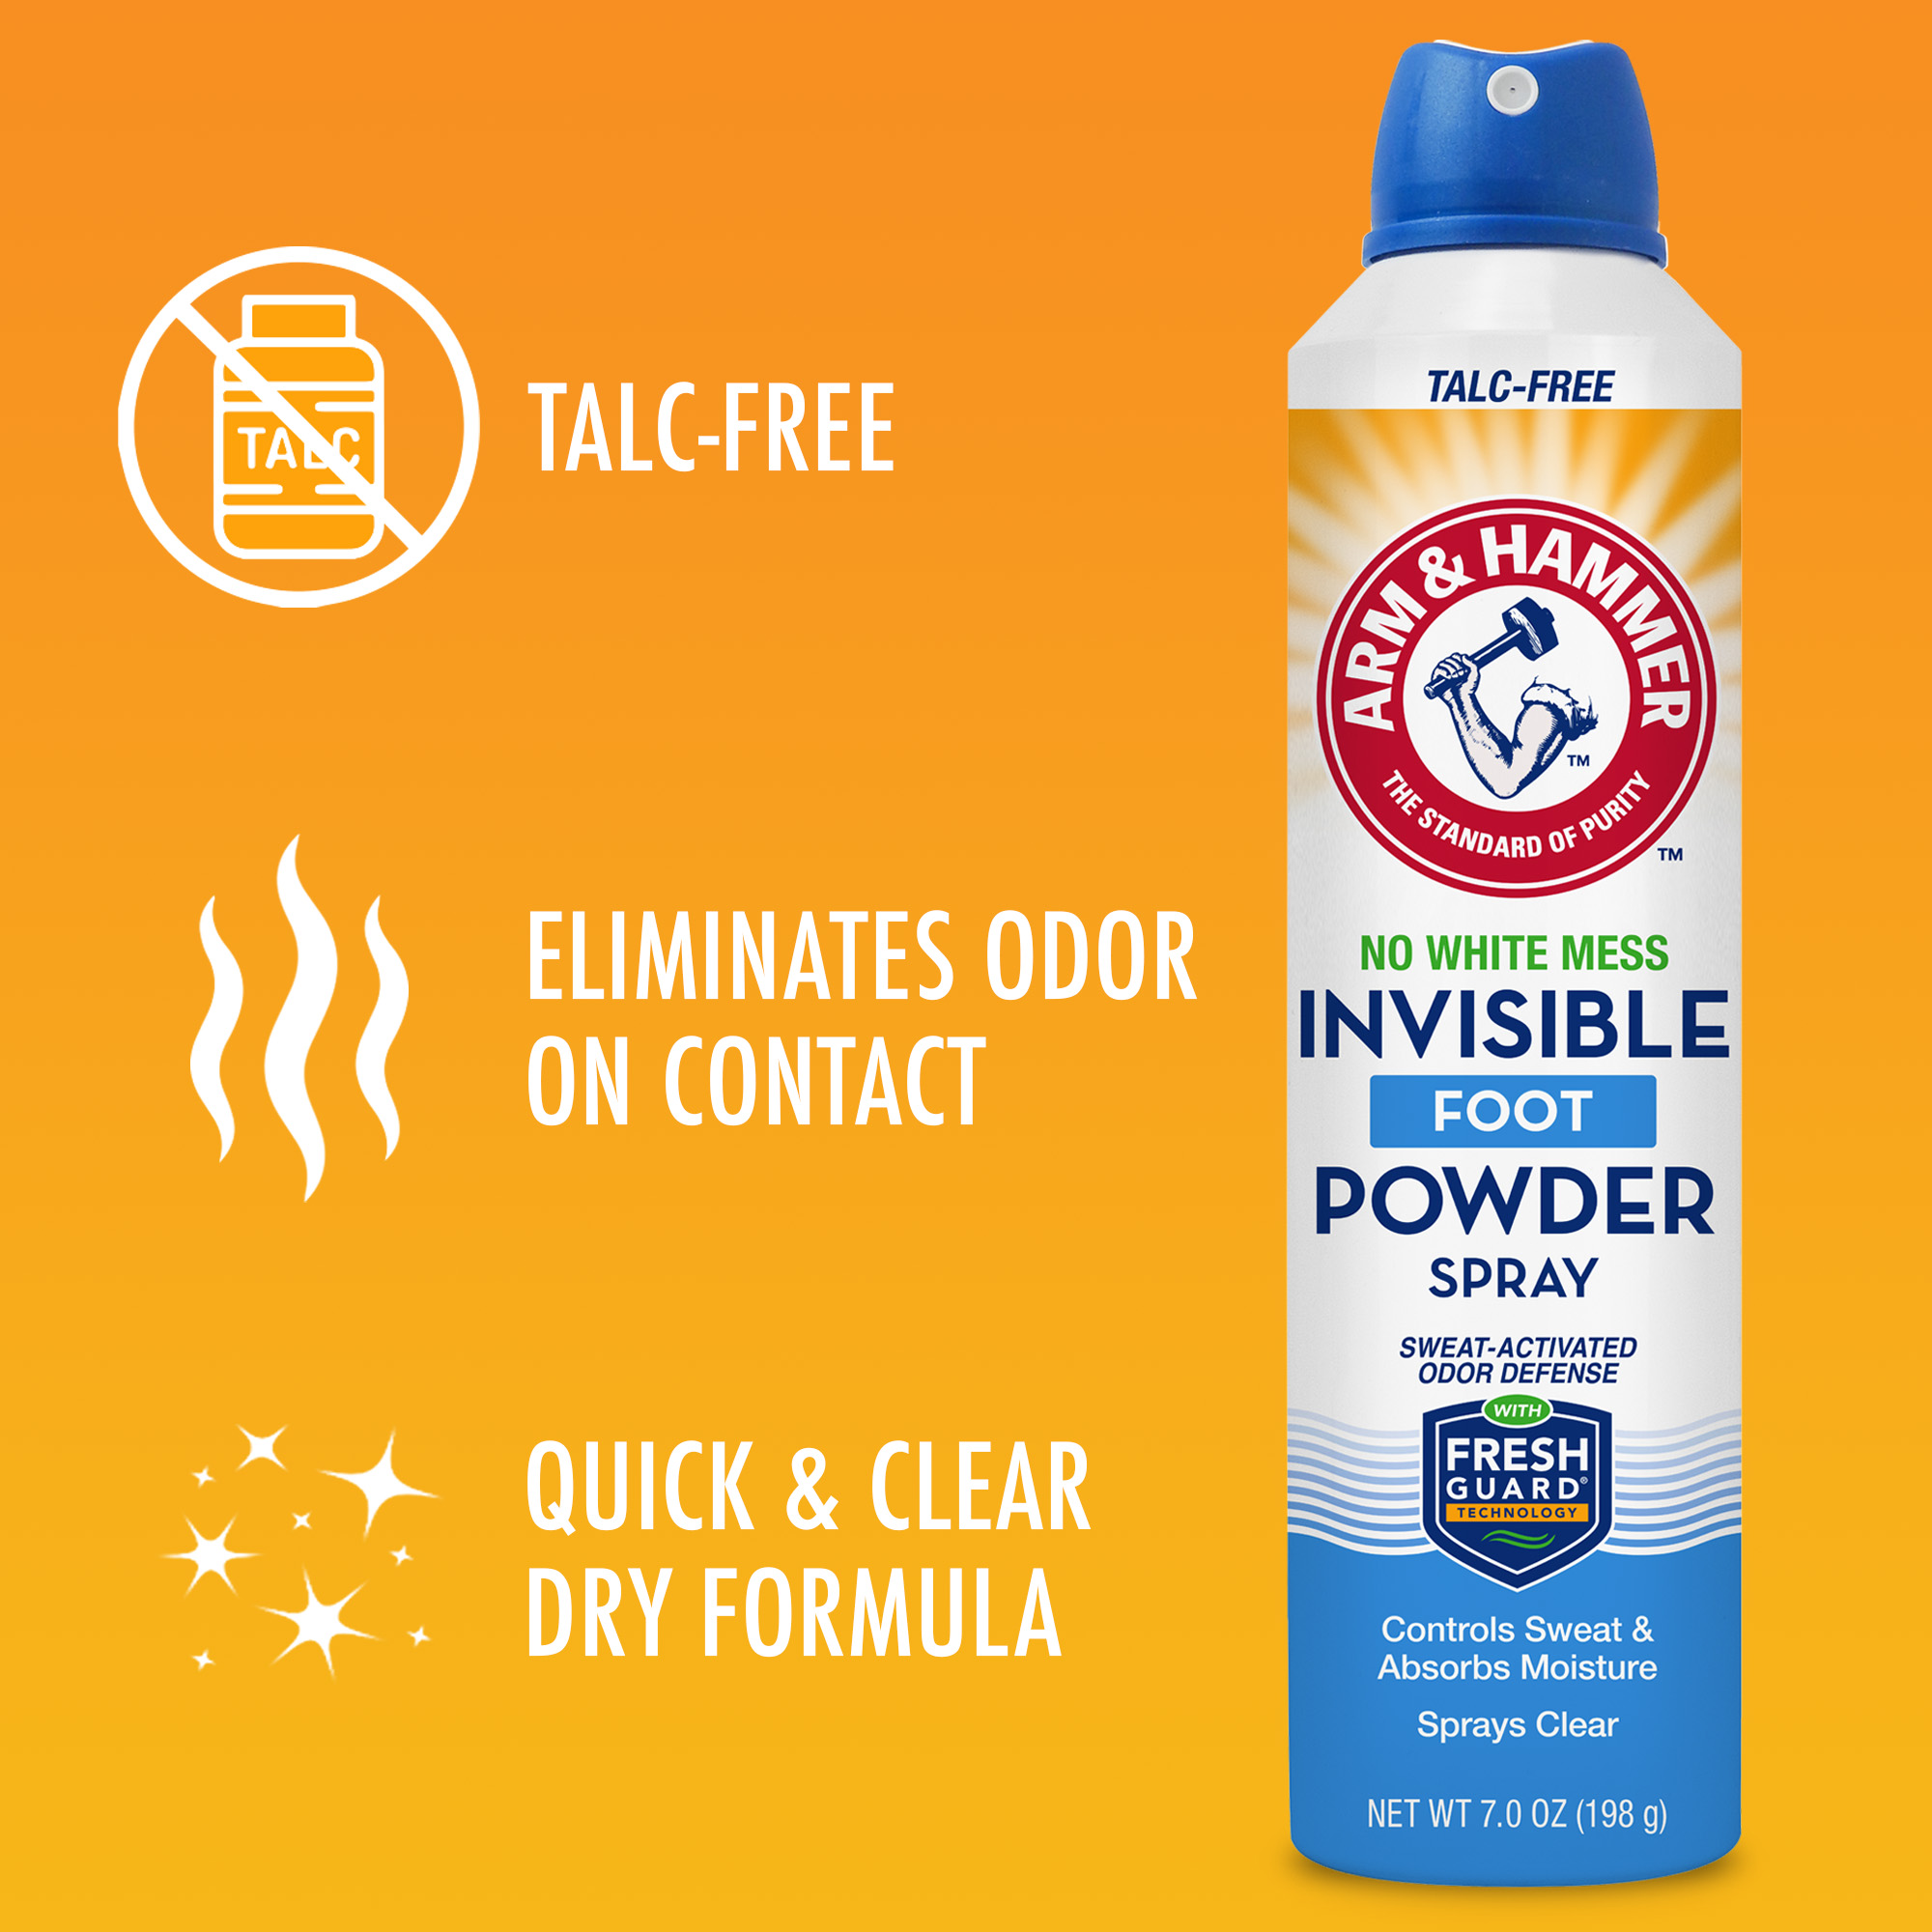 Arm & Hammer Invisible Spray Foot Powder - image 8 of 14